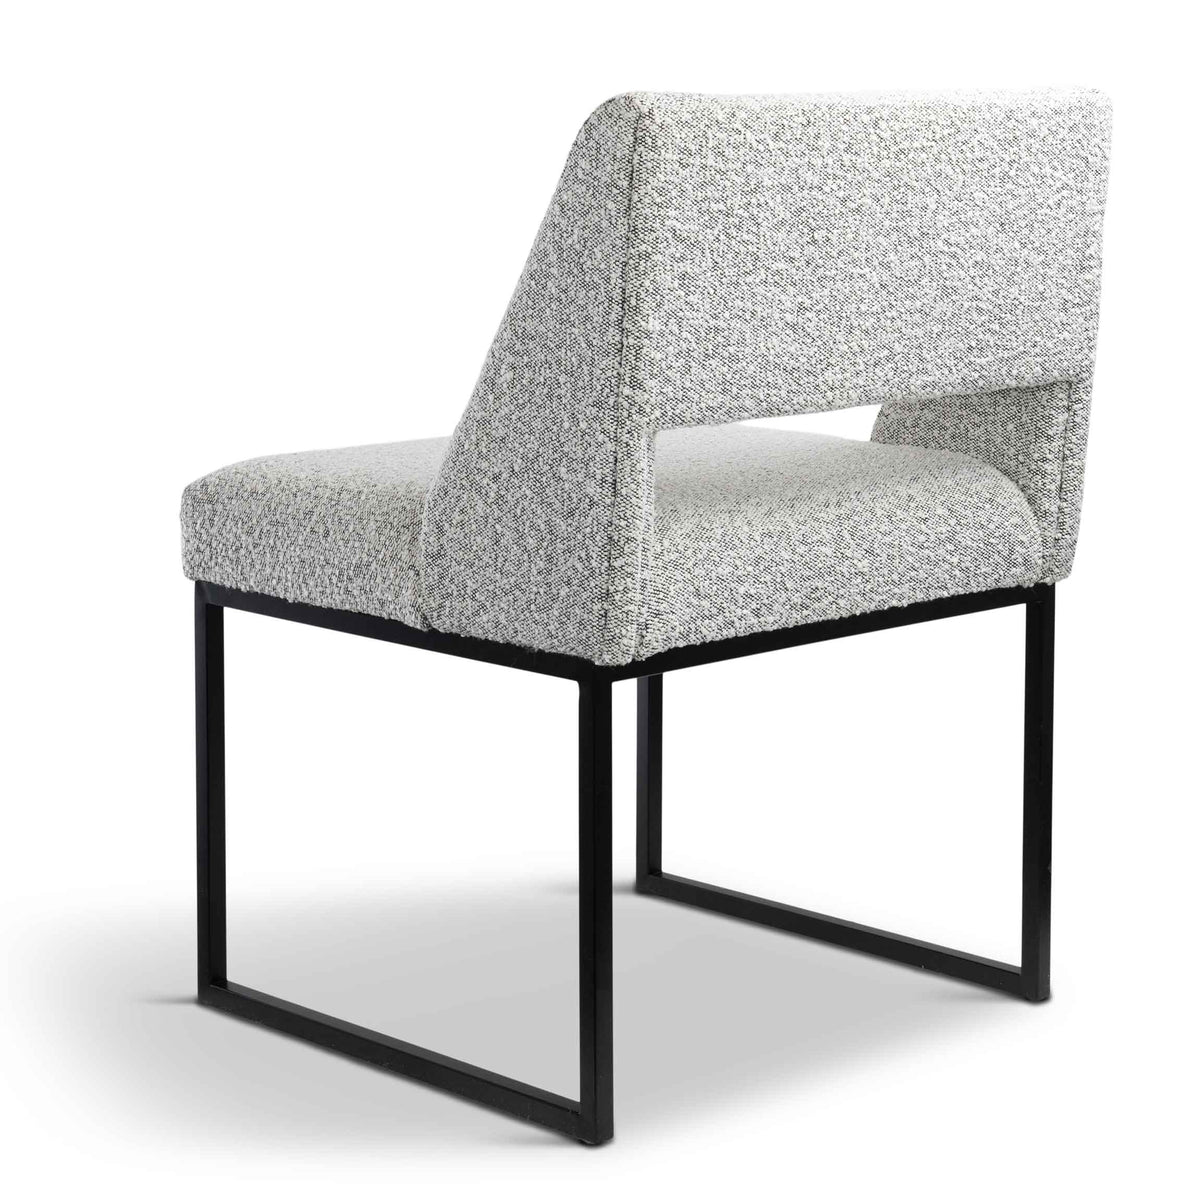 Miami Shores Dining Chair